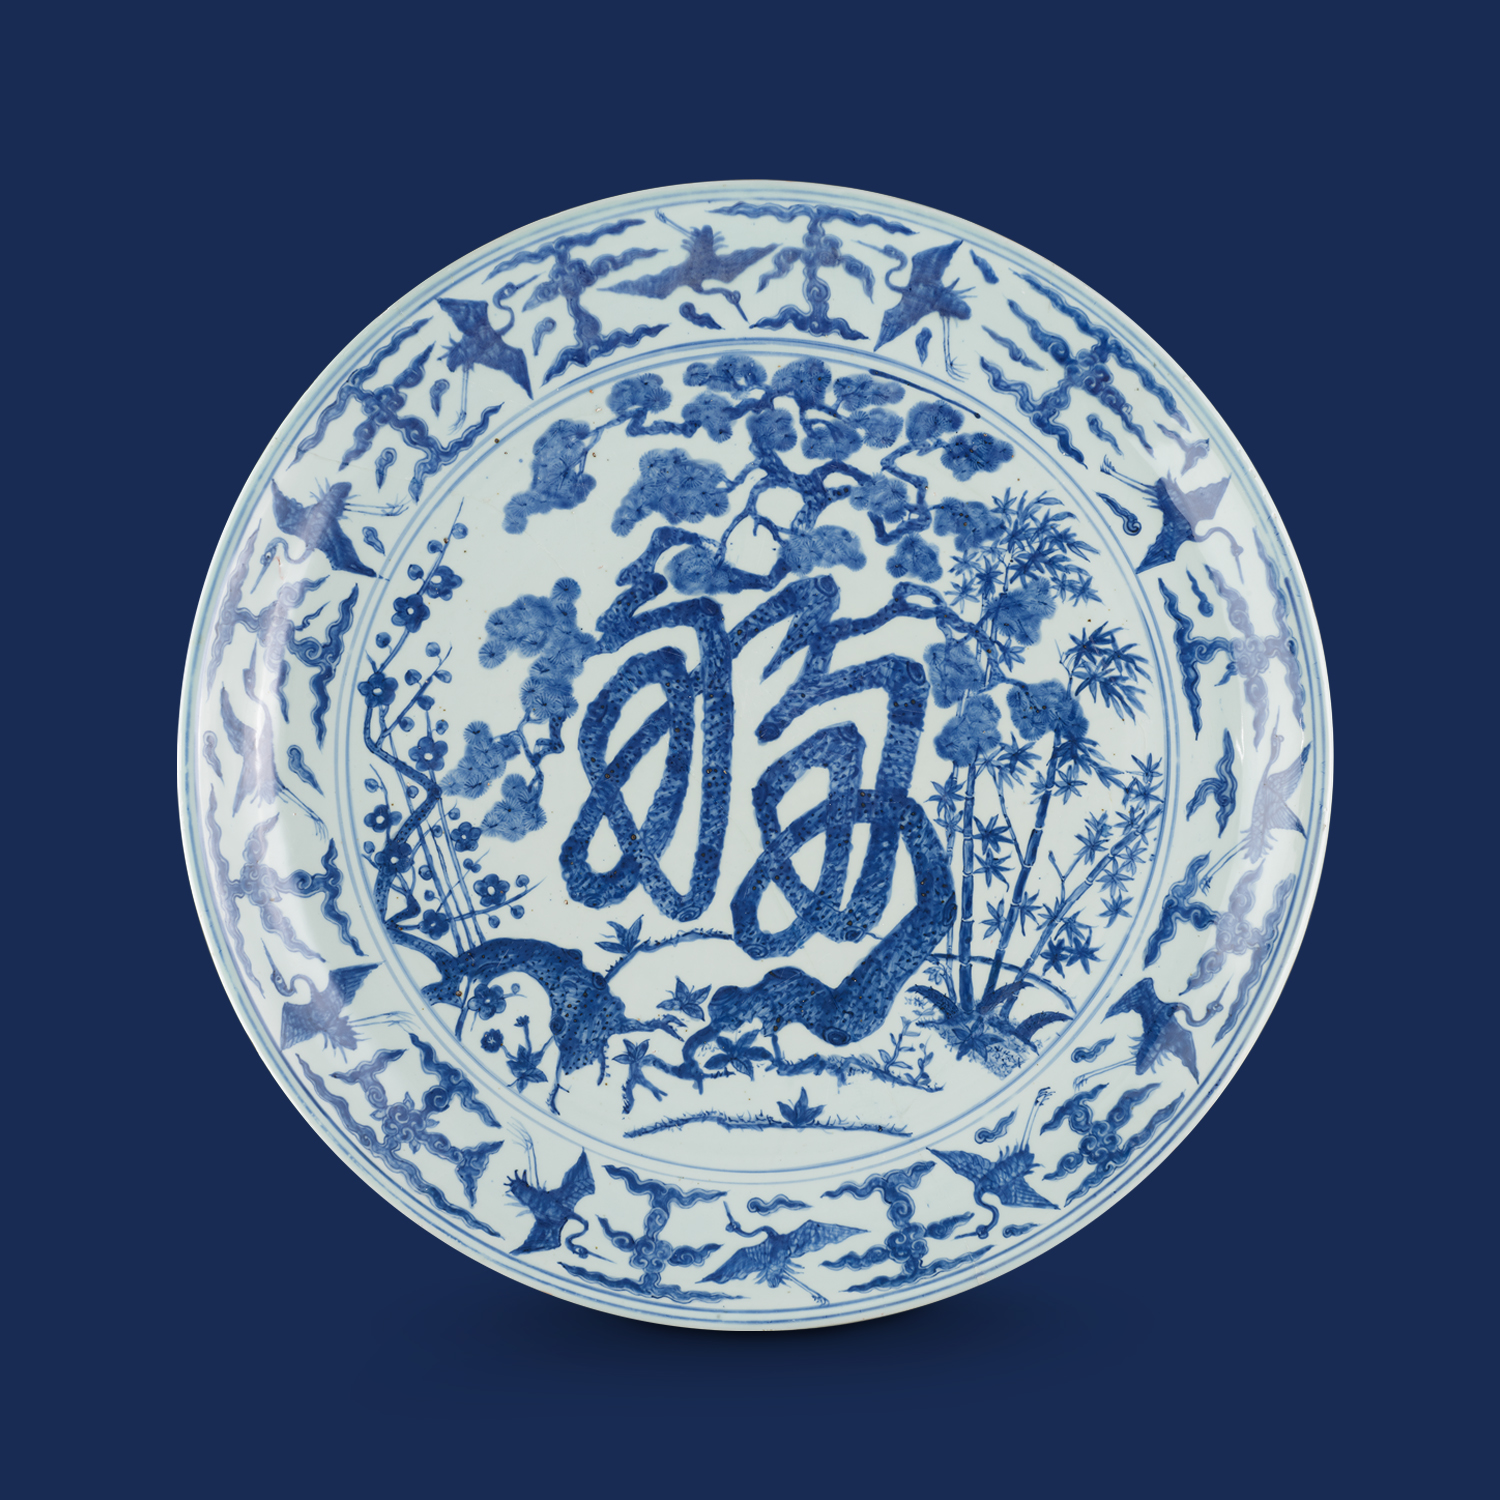 Charger with the Three Friends of Winter and <i>fu</i> character design in underglaze blue